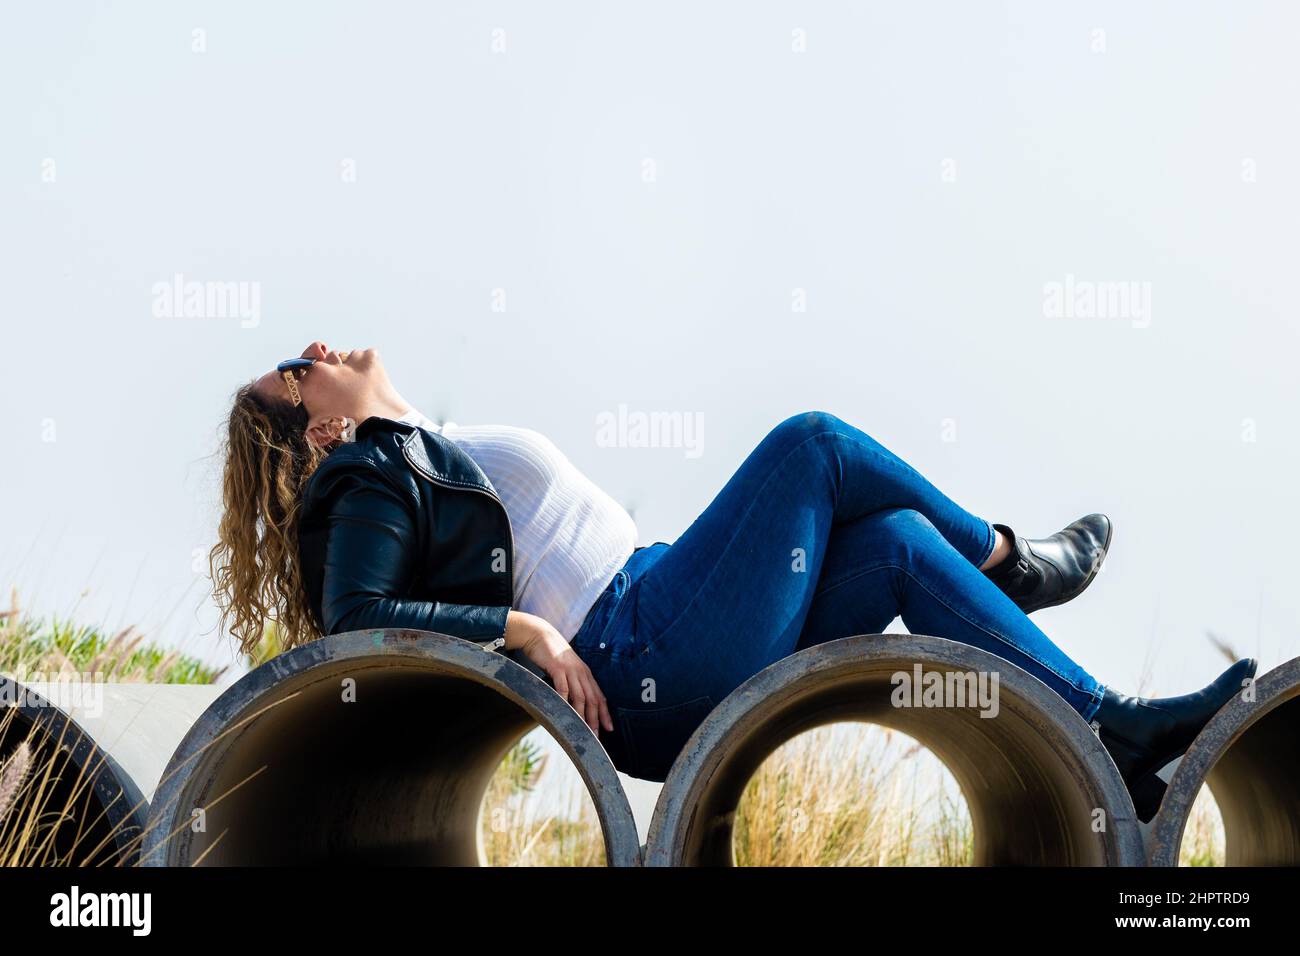 Caucasian woman with sunglasses lying and posing on reinforced concrete pipes in the industrial area Stock Photo